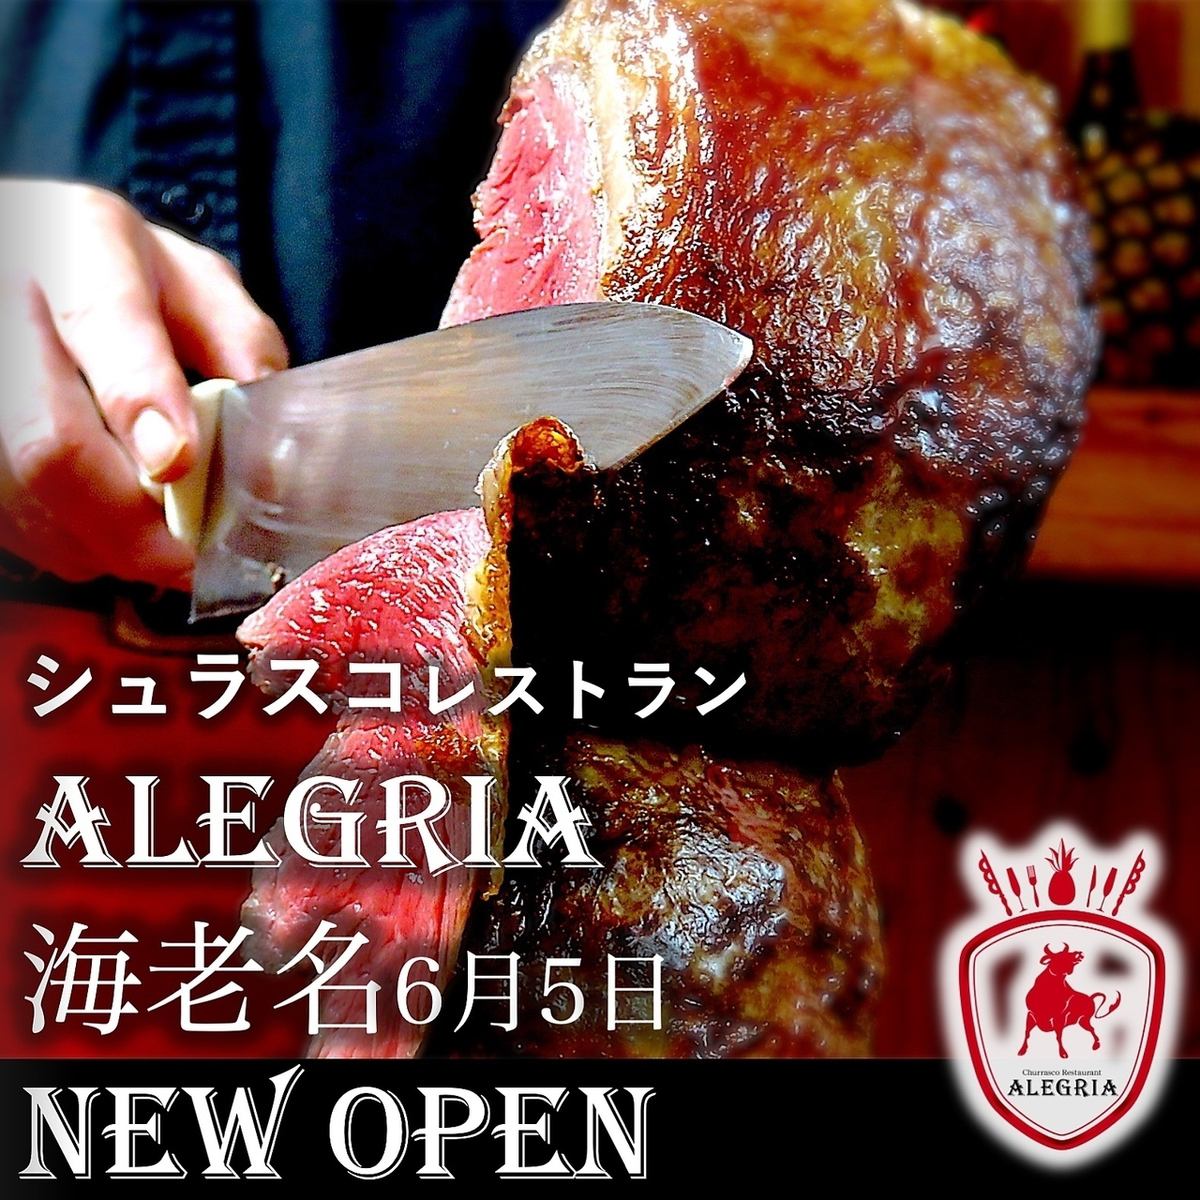 Vina Gardens Terrace 1F ★All-you-can-eat 20 types of Churrasco!★